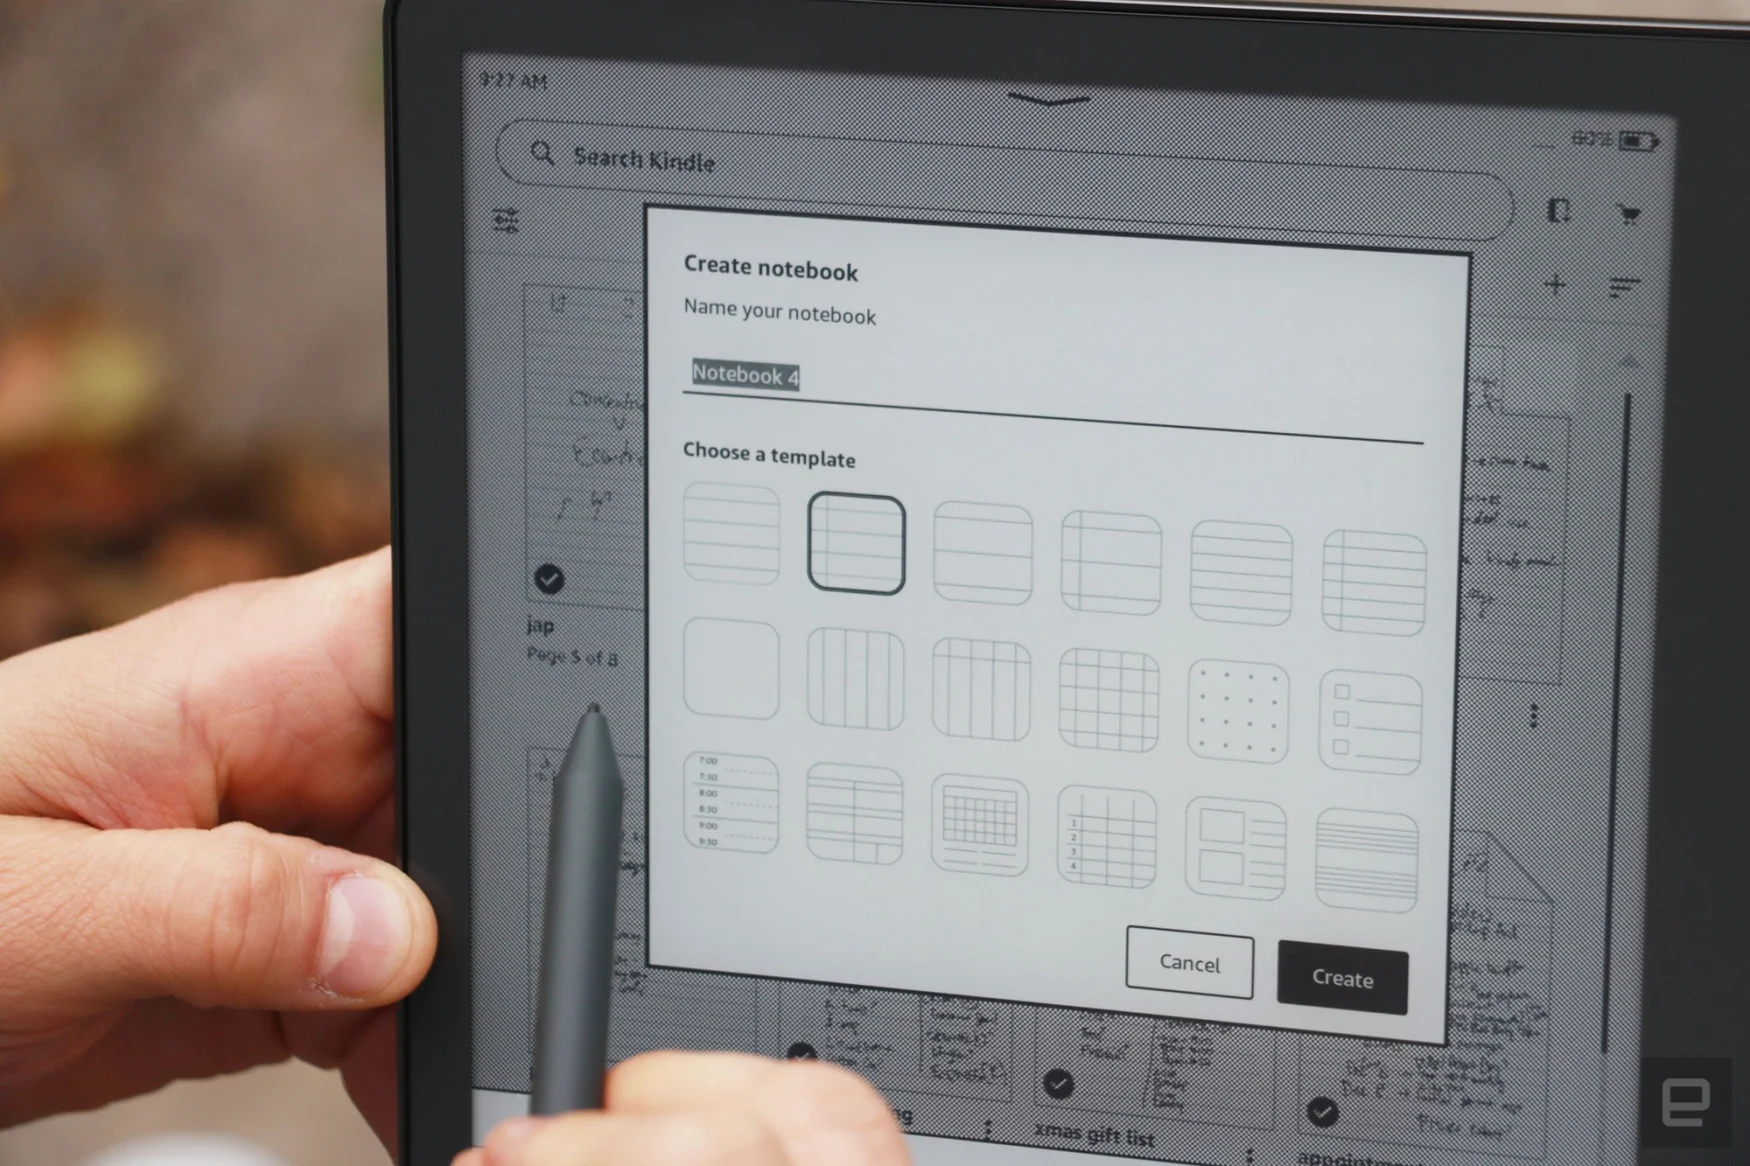 Closeup of the Kindle Scribe's screen showing the 